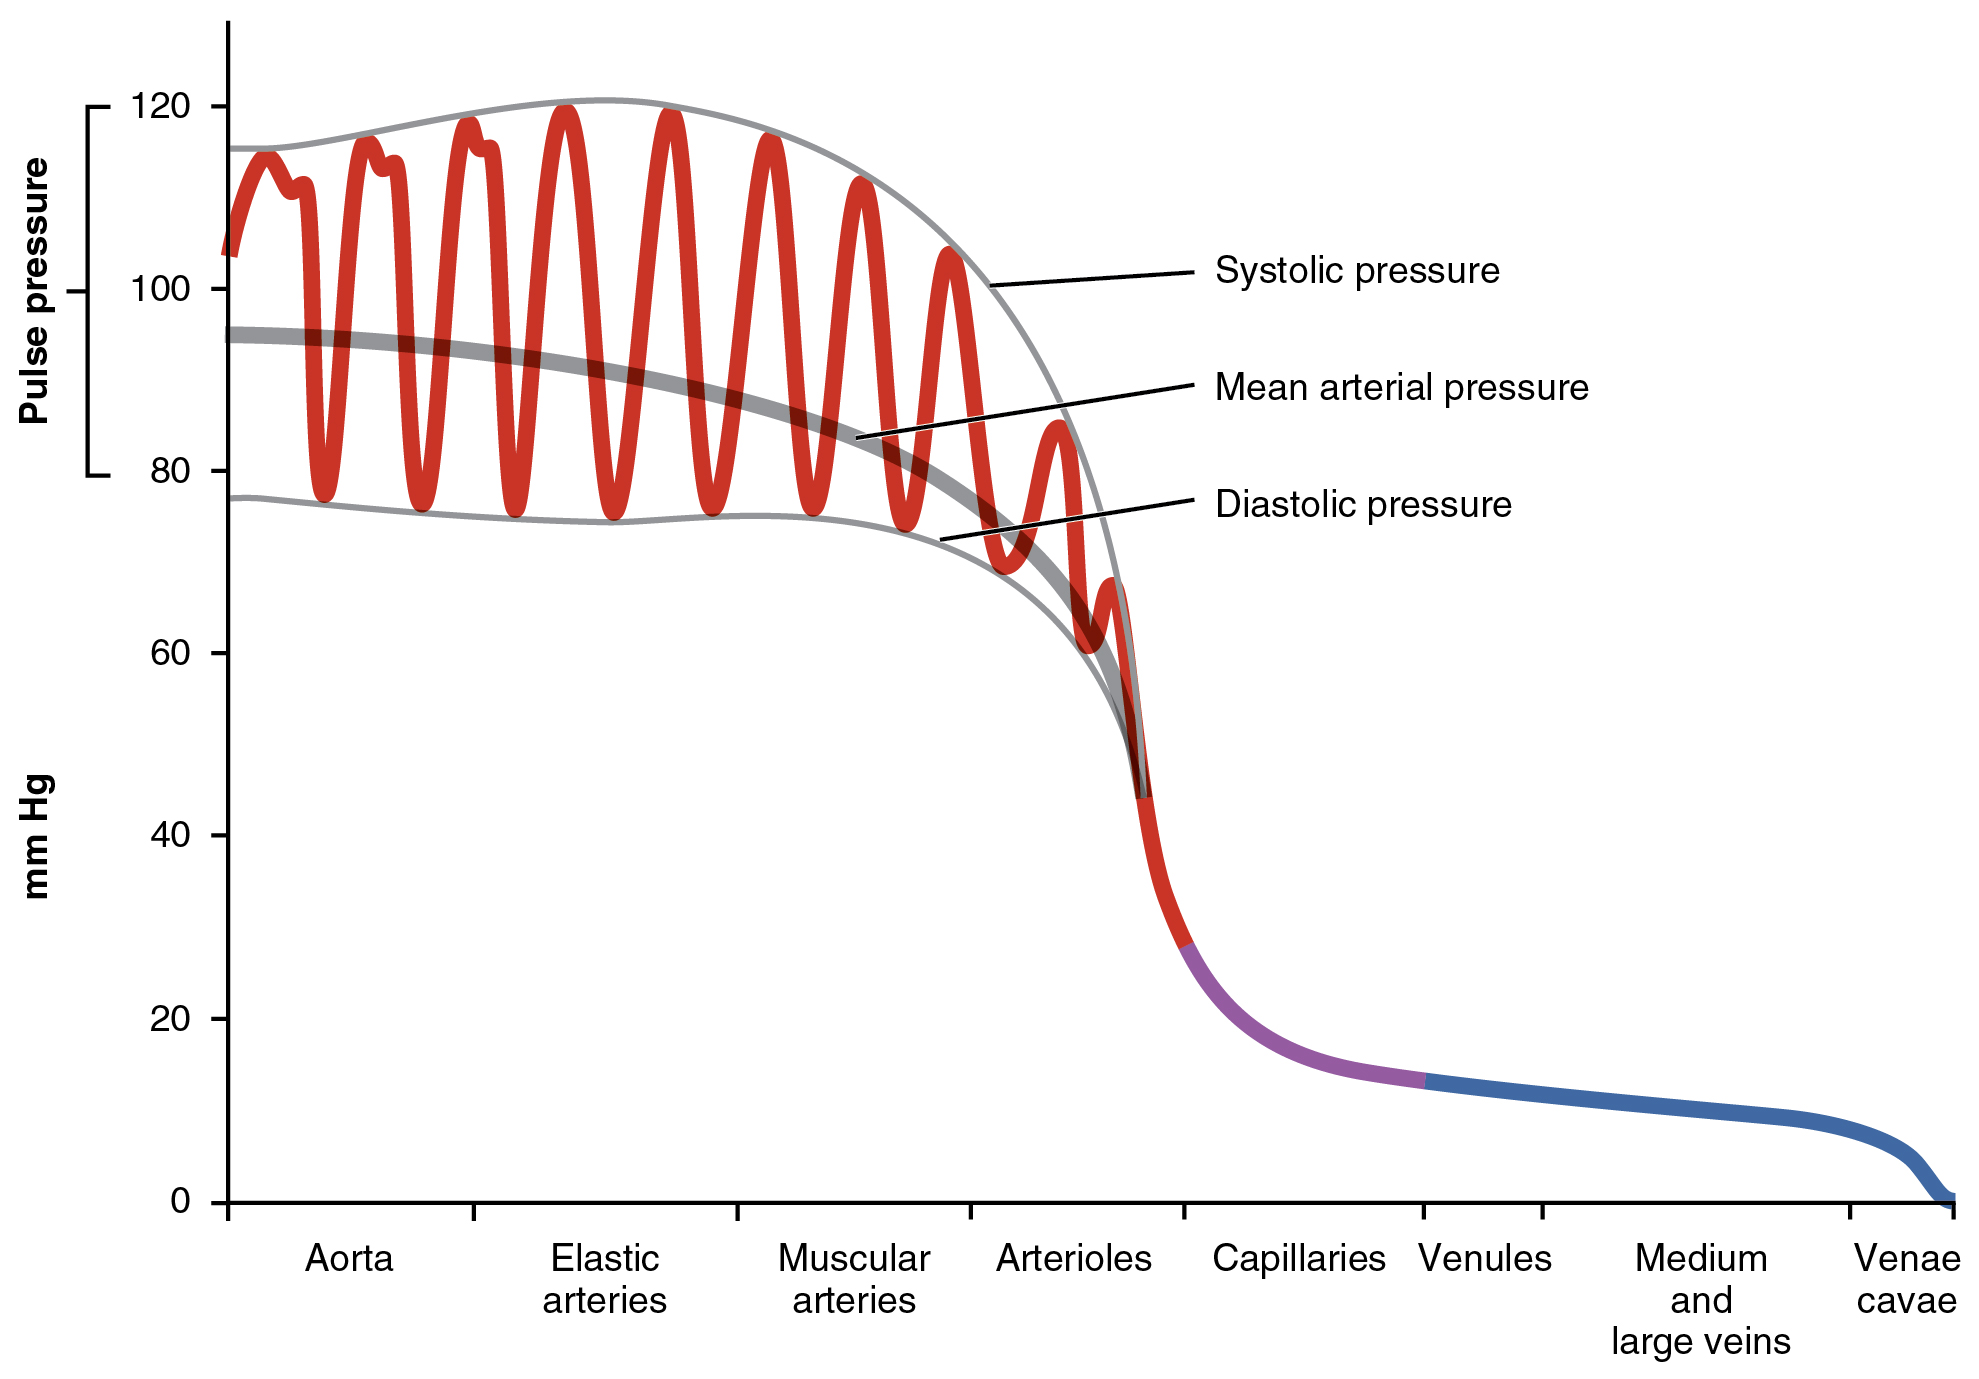 This graph shows the value of pulse pressure in different types of blood vessels. The y-axis is pressure and the x-axis are names of vessels from the largest (the aorta) to the smallest (capillaries) to the largest veins (vena cavae).  Arterial pressure is measured by a red oscillating line which decreases in amplitude as it approaches the small arterioles and smallest capillaries.  The venous flow is represented a blue line.  As arteries move to veins, the pressures decrease from 120 mmHg to near 0 mmHg, with a vertical drop in pressure at the capillaries.